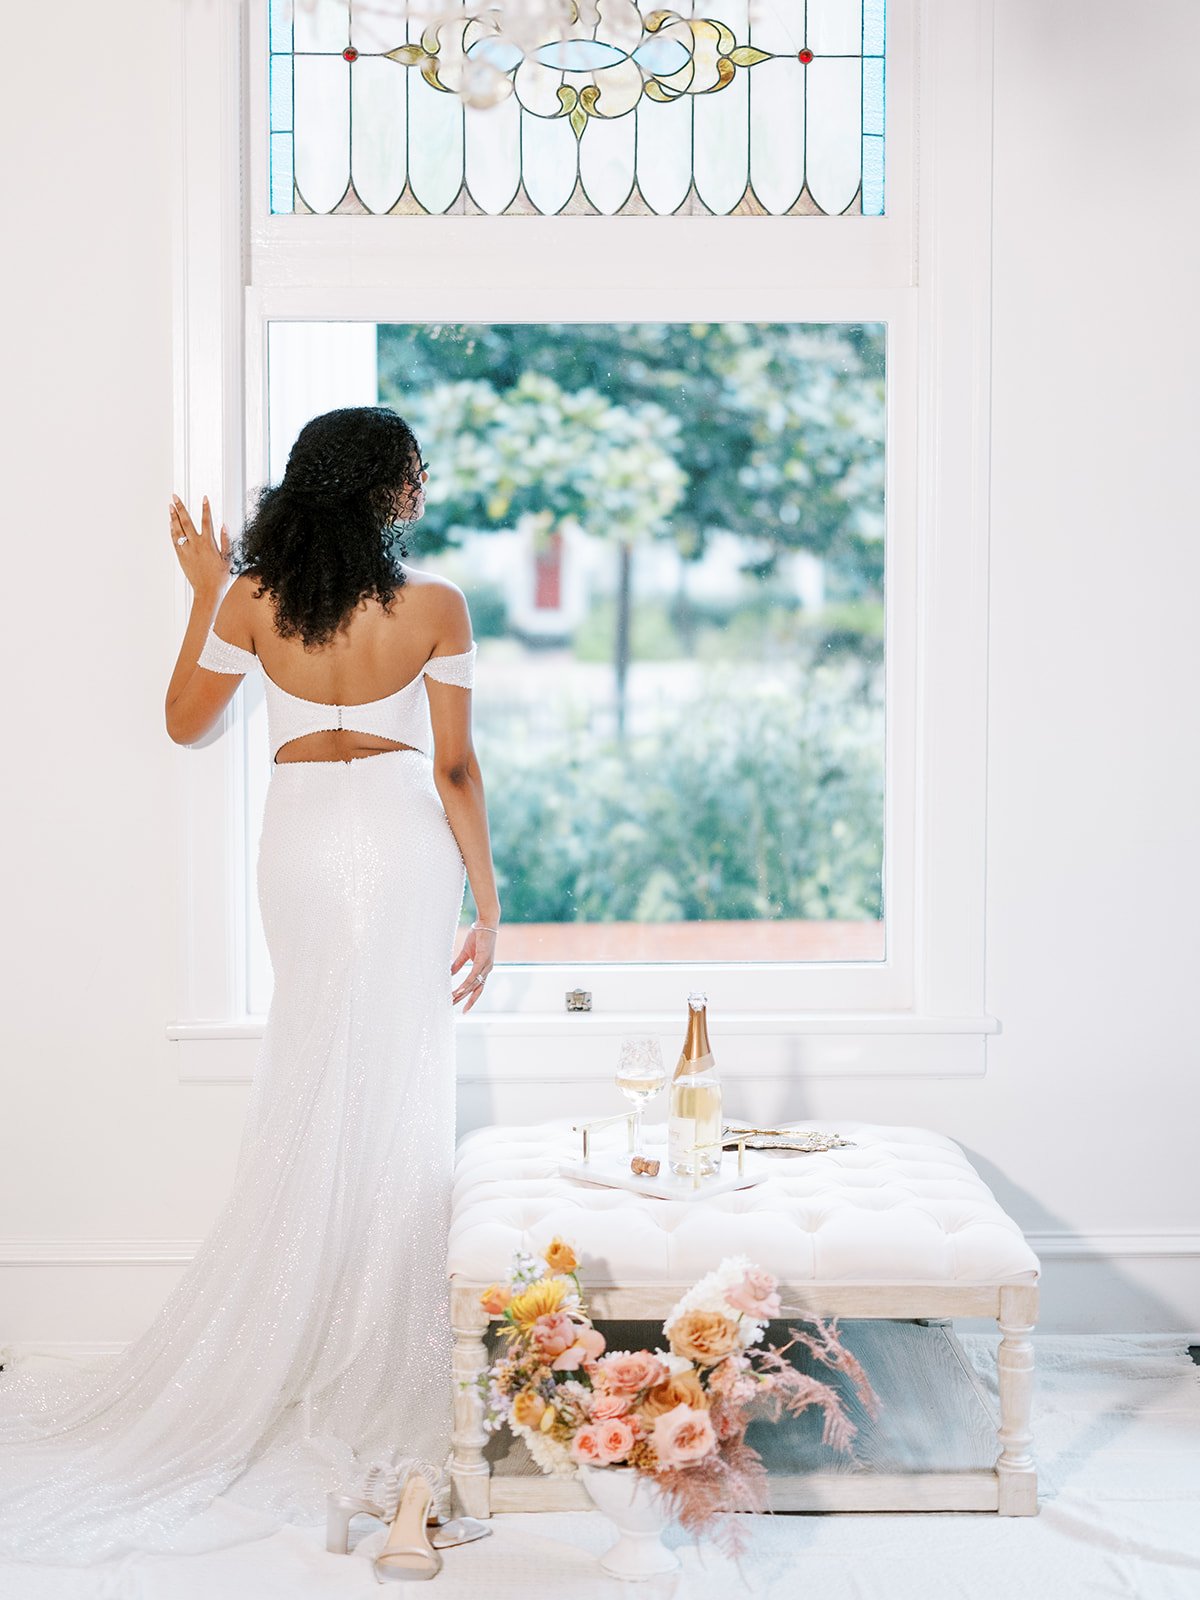 a unique and cool sparkly alena leena wedding dress in s chic styled wedding shoot in austin texas.